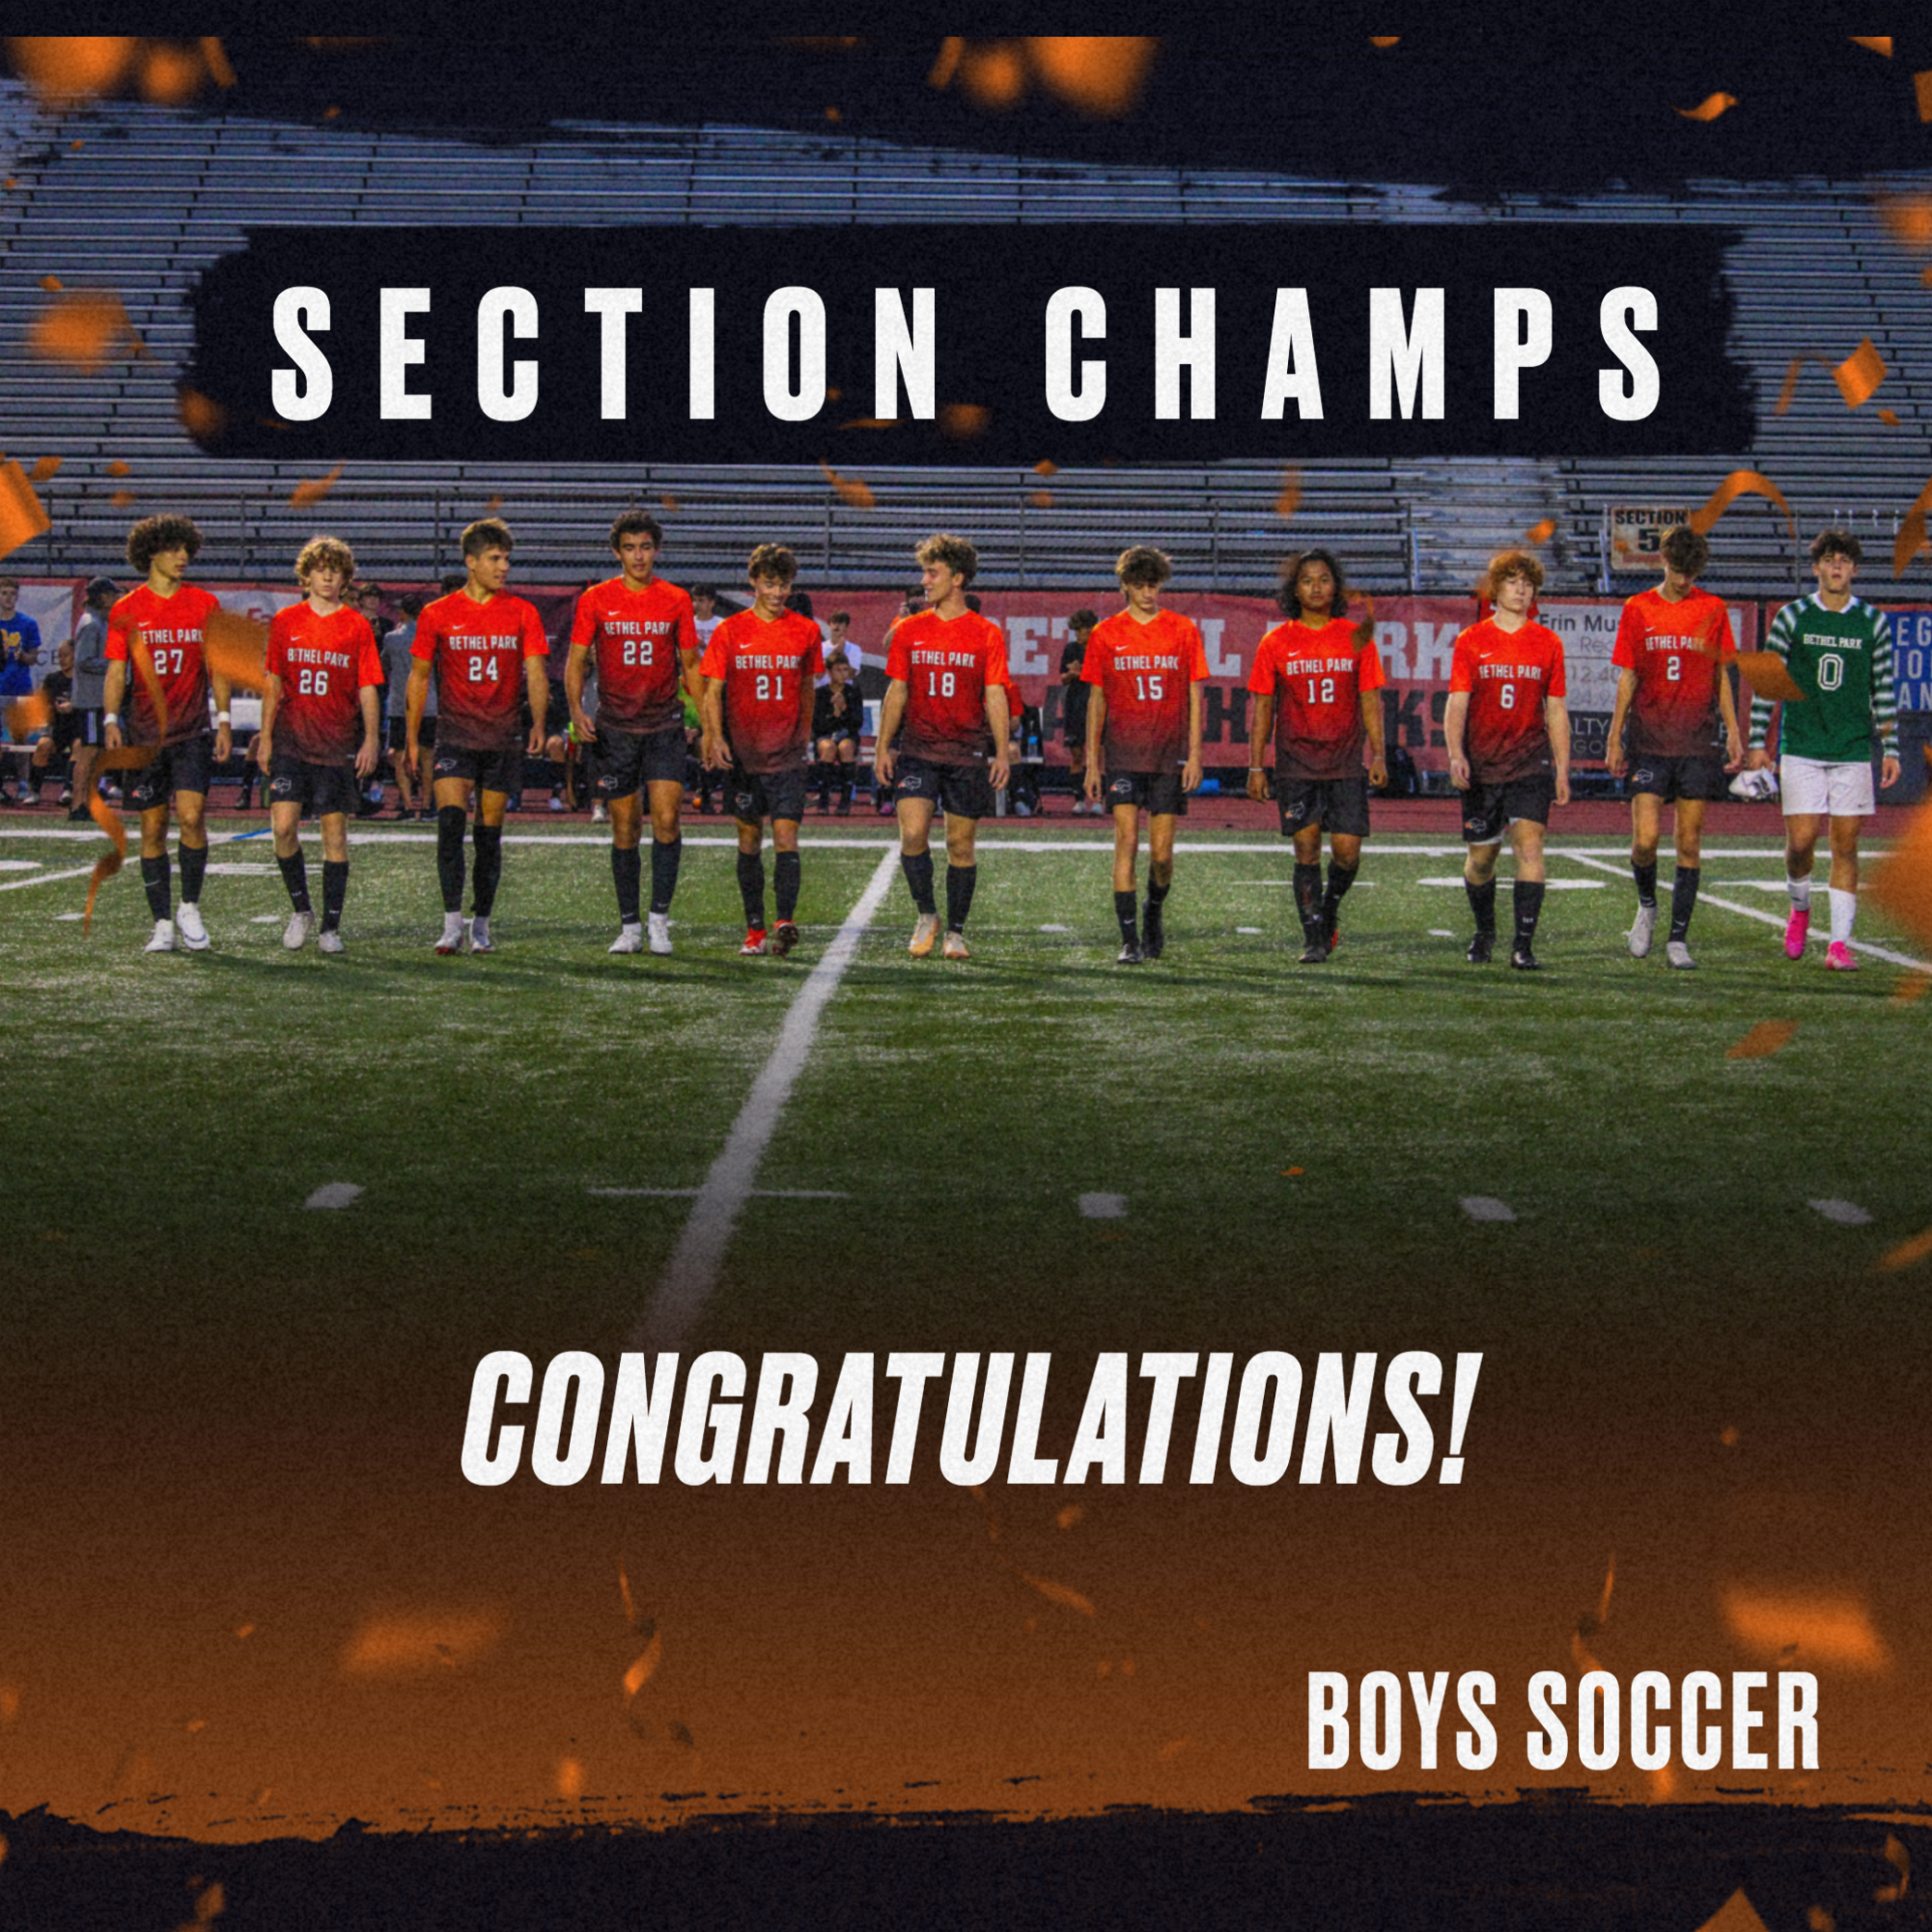 The boys soccer team clinched the section title after a 5-1 win over Connellsville.